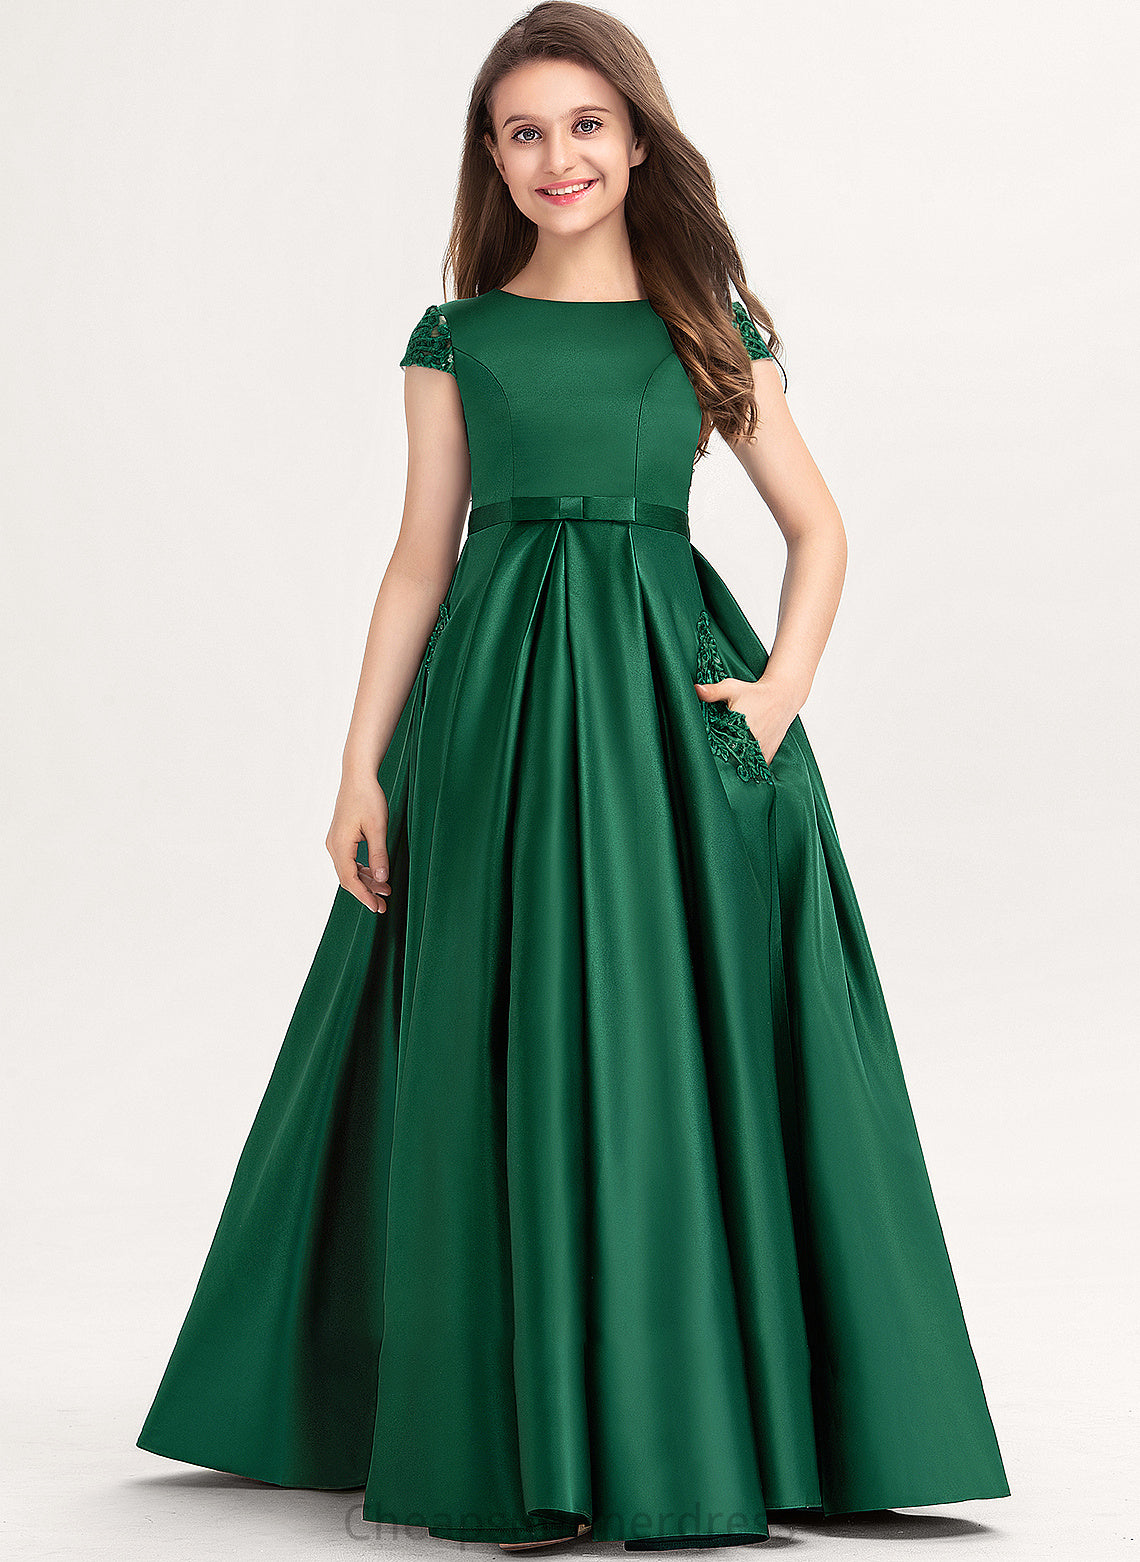 Scoop Junior Bridesmaid Dresses Floor-Length With Neck Lace Satin Ball-Gown/Princess Bow(s) Adyson Pockets